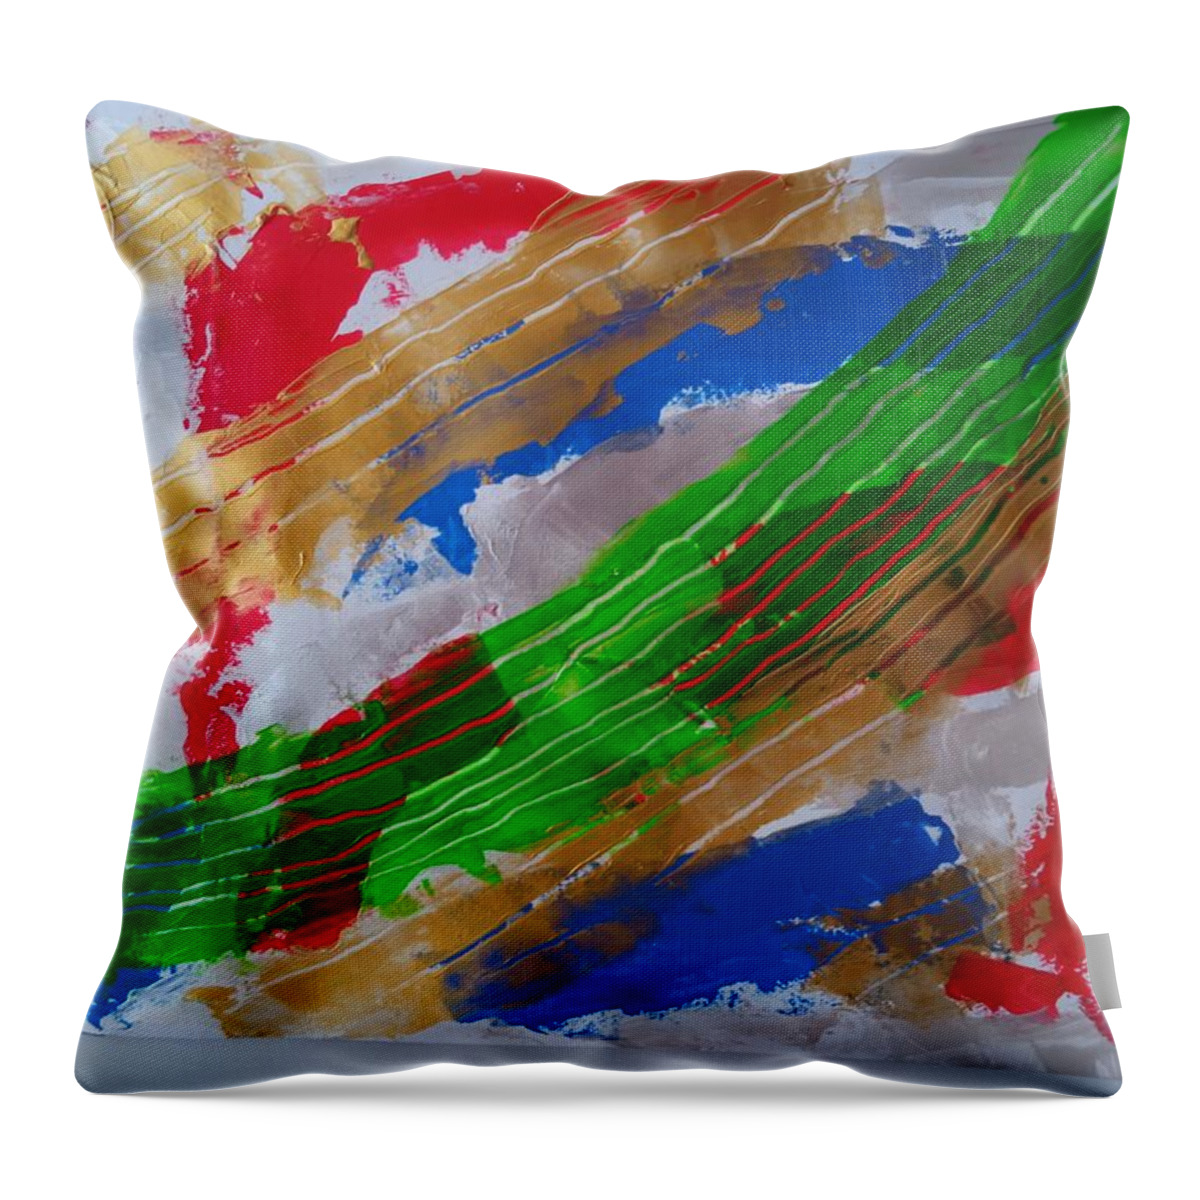  Throw Pillow featuring the painting Caos63 open artwork by Giuseppe Monti